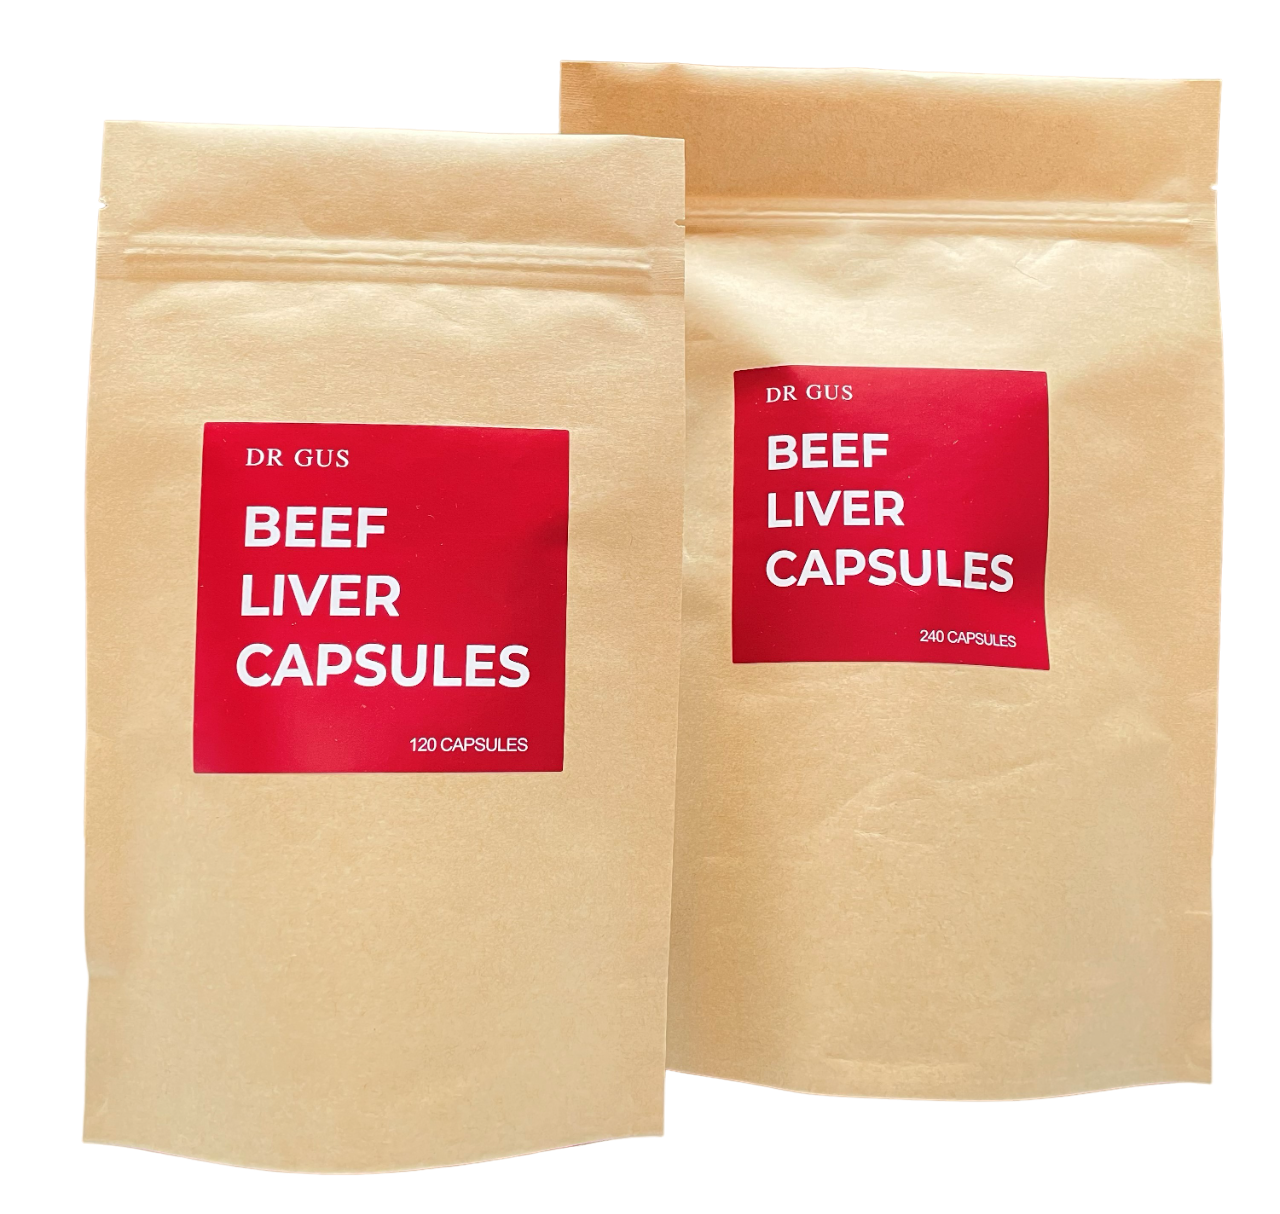  dr gus uk grass fed organic beef liver capsules